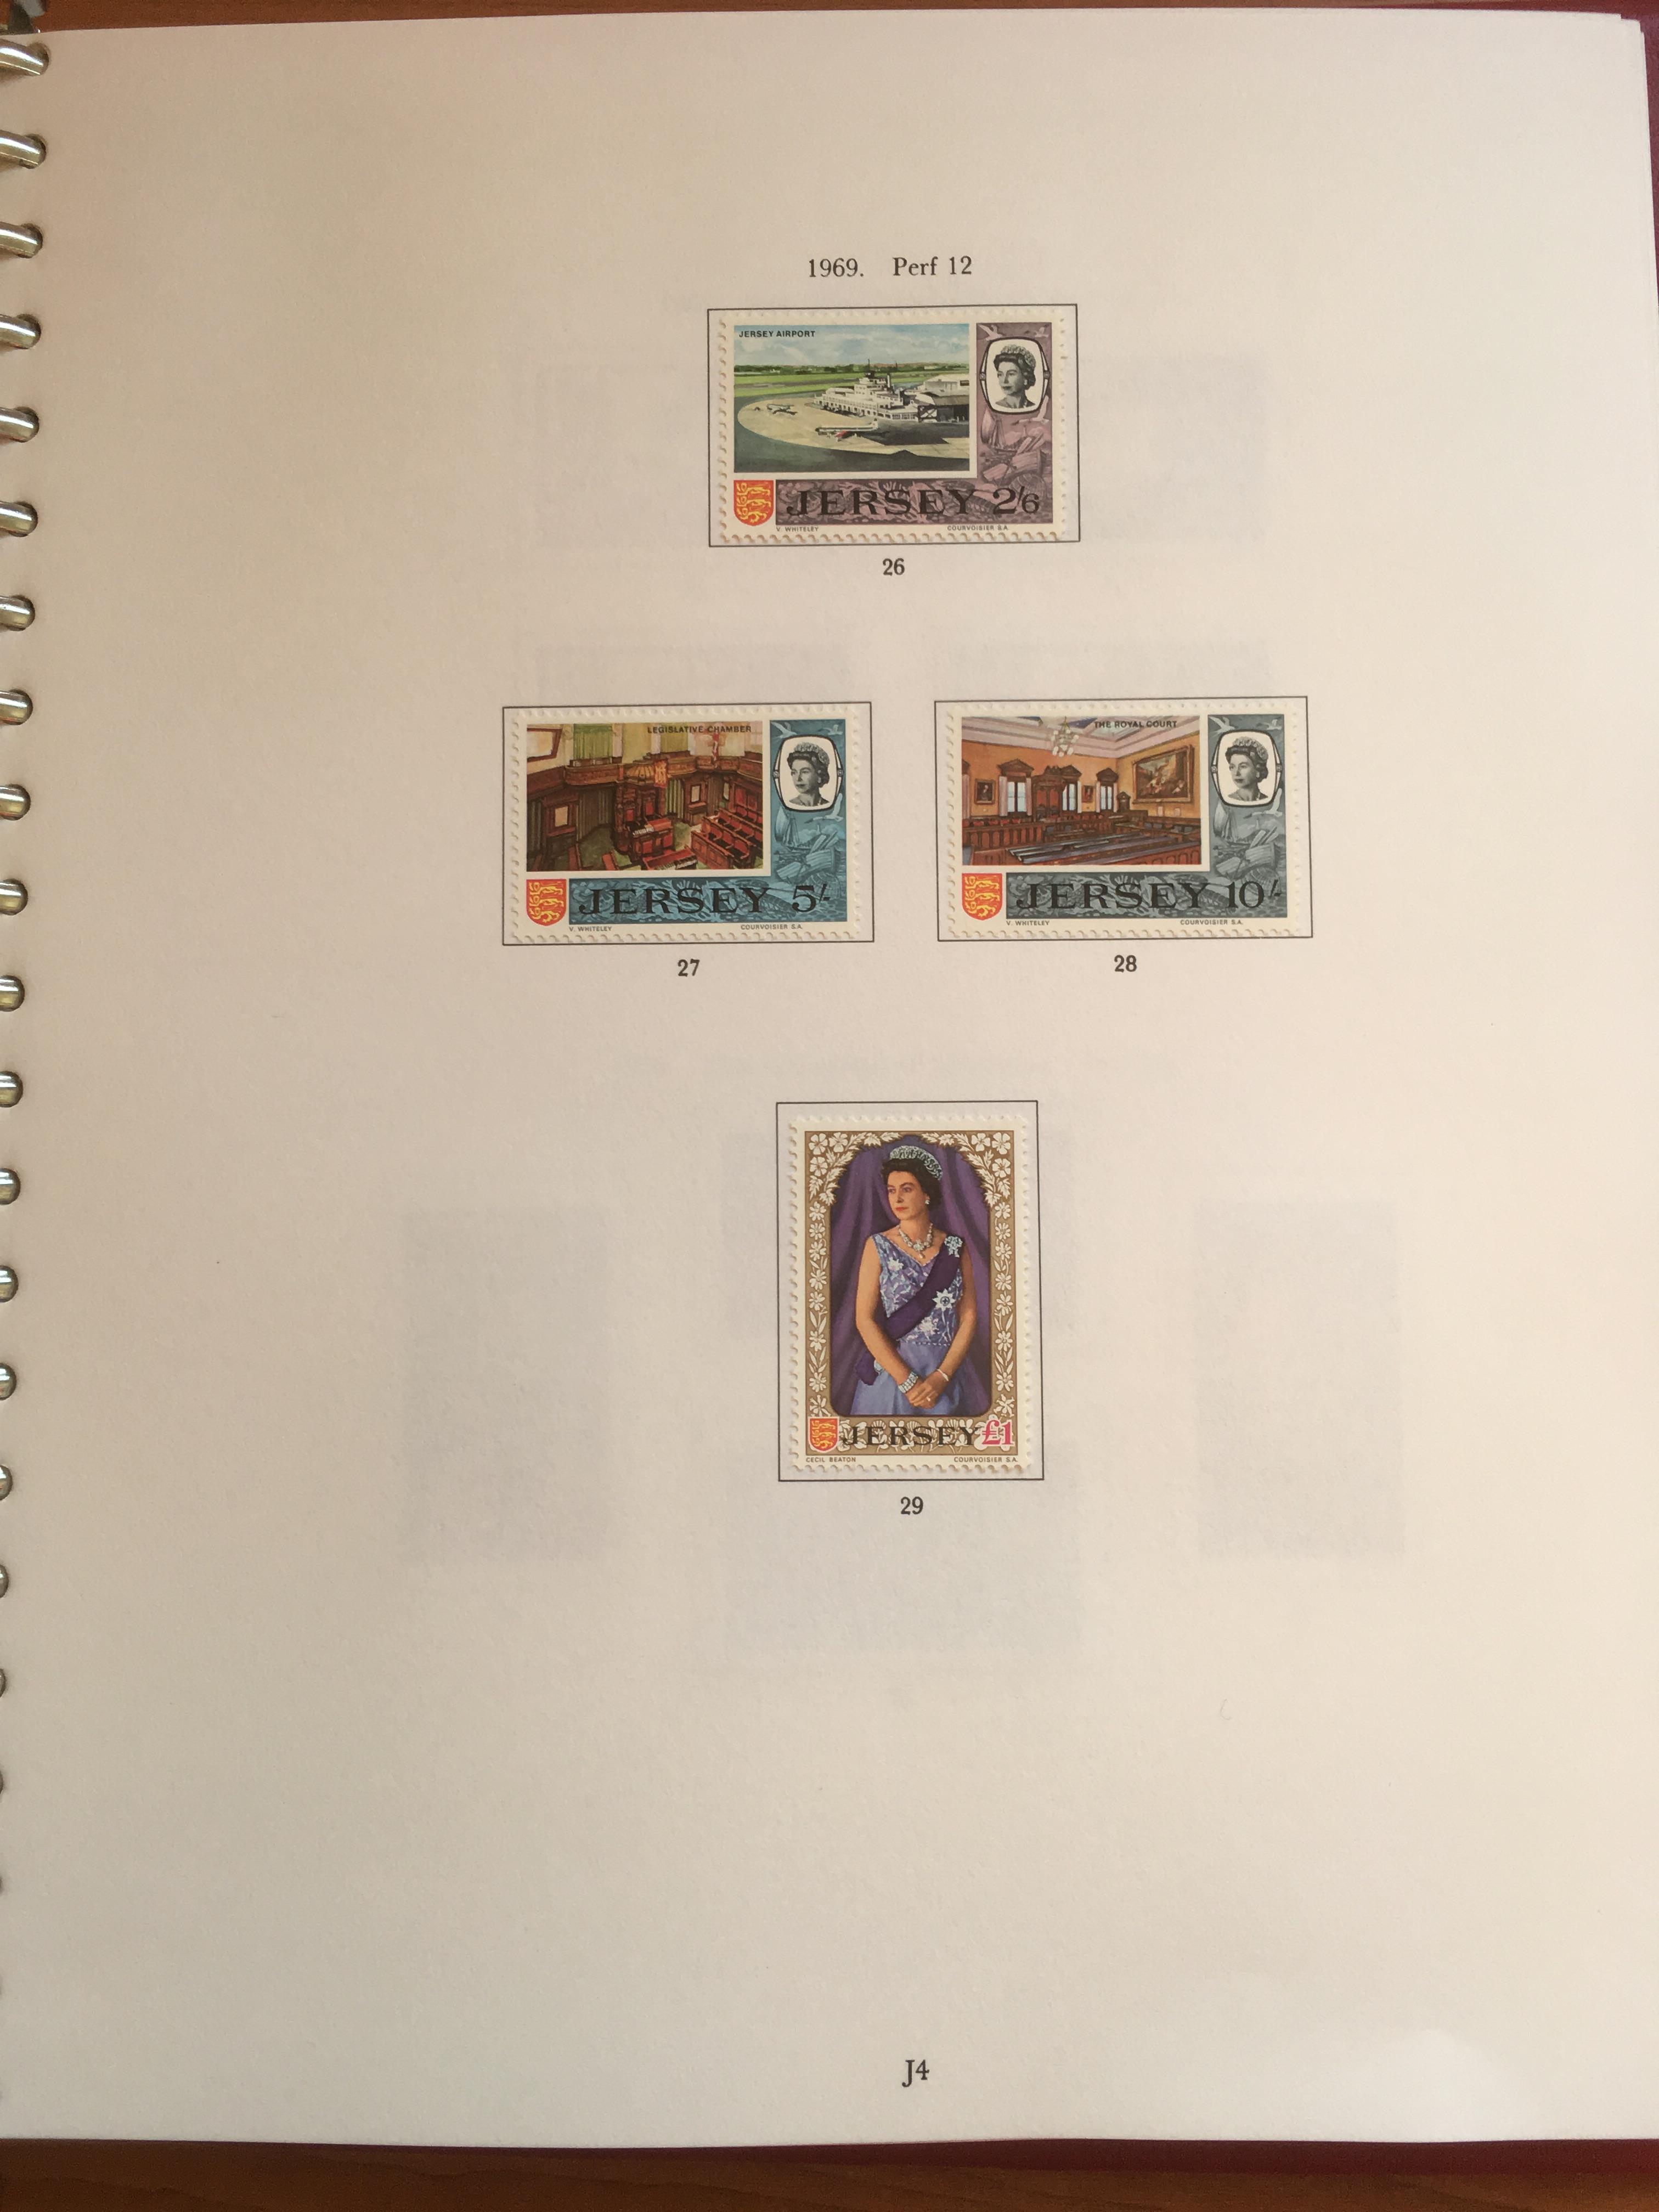 BOX WITH GB AND CHANNEL ISLANDS STAMP COLLECTIONS IN ALBUMS, - Image 10 of 10